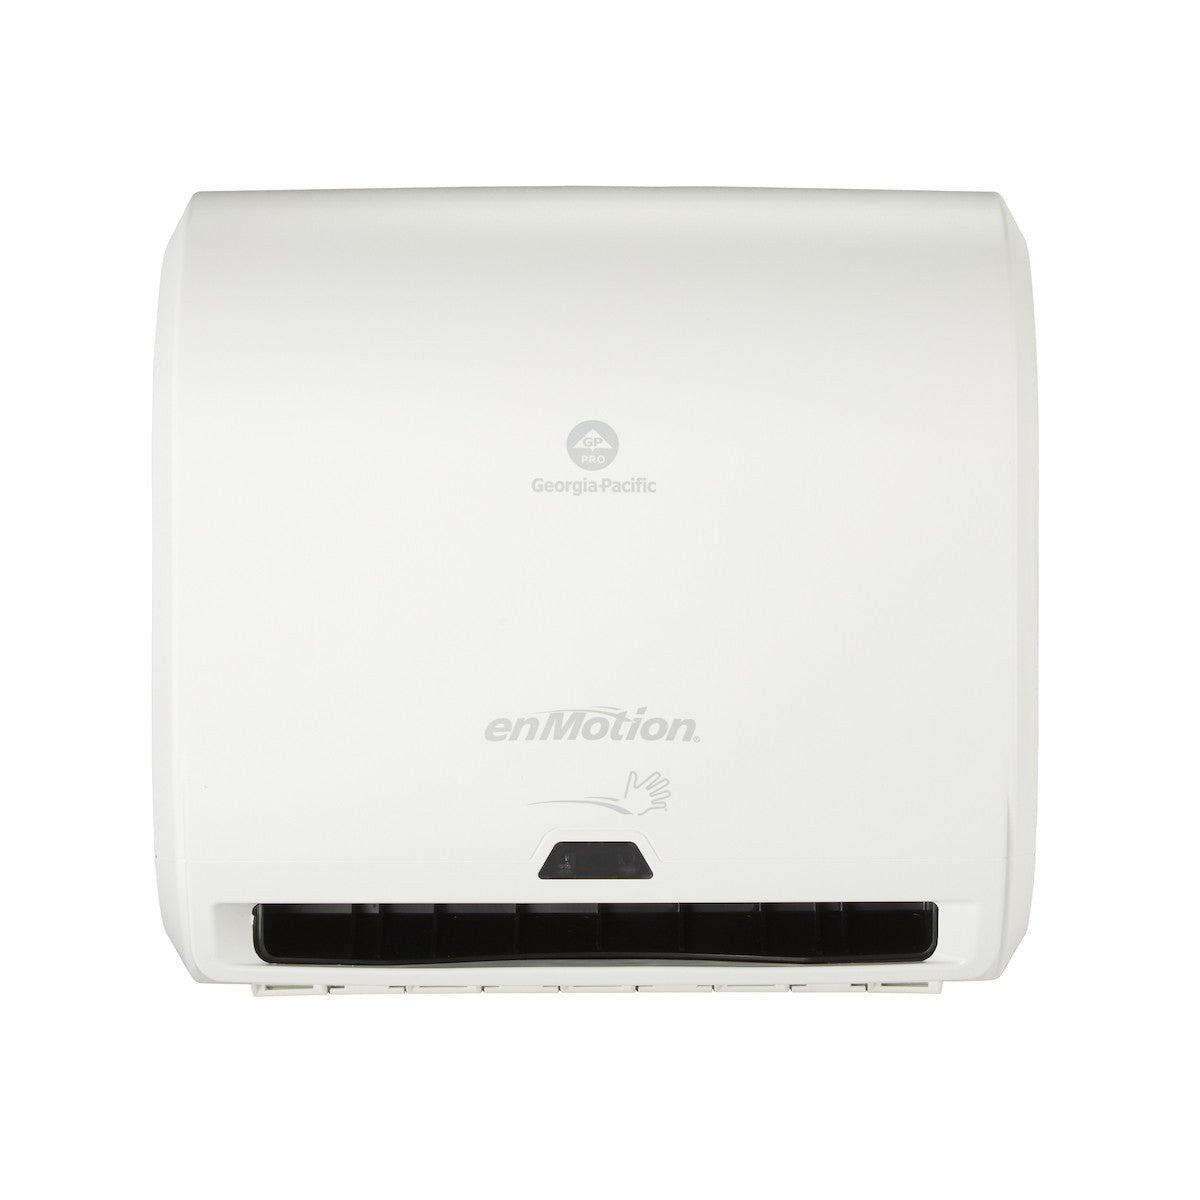 Georgia Pacific 59447A enMotion Impulse 10" 1-Roll Automated Touchless Paper Towel Dispenser, White